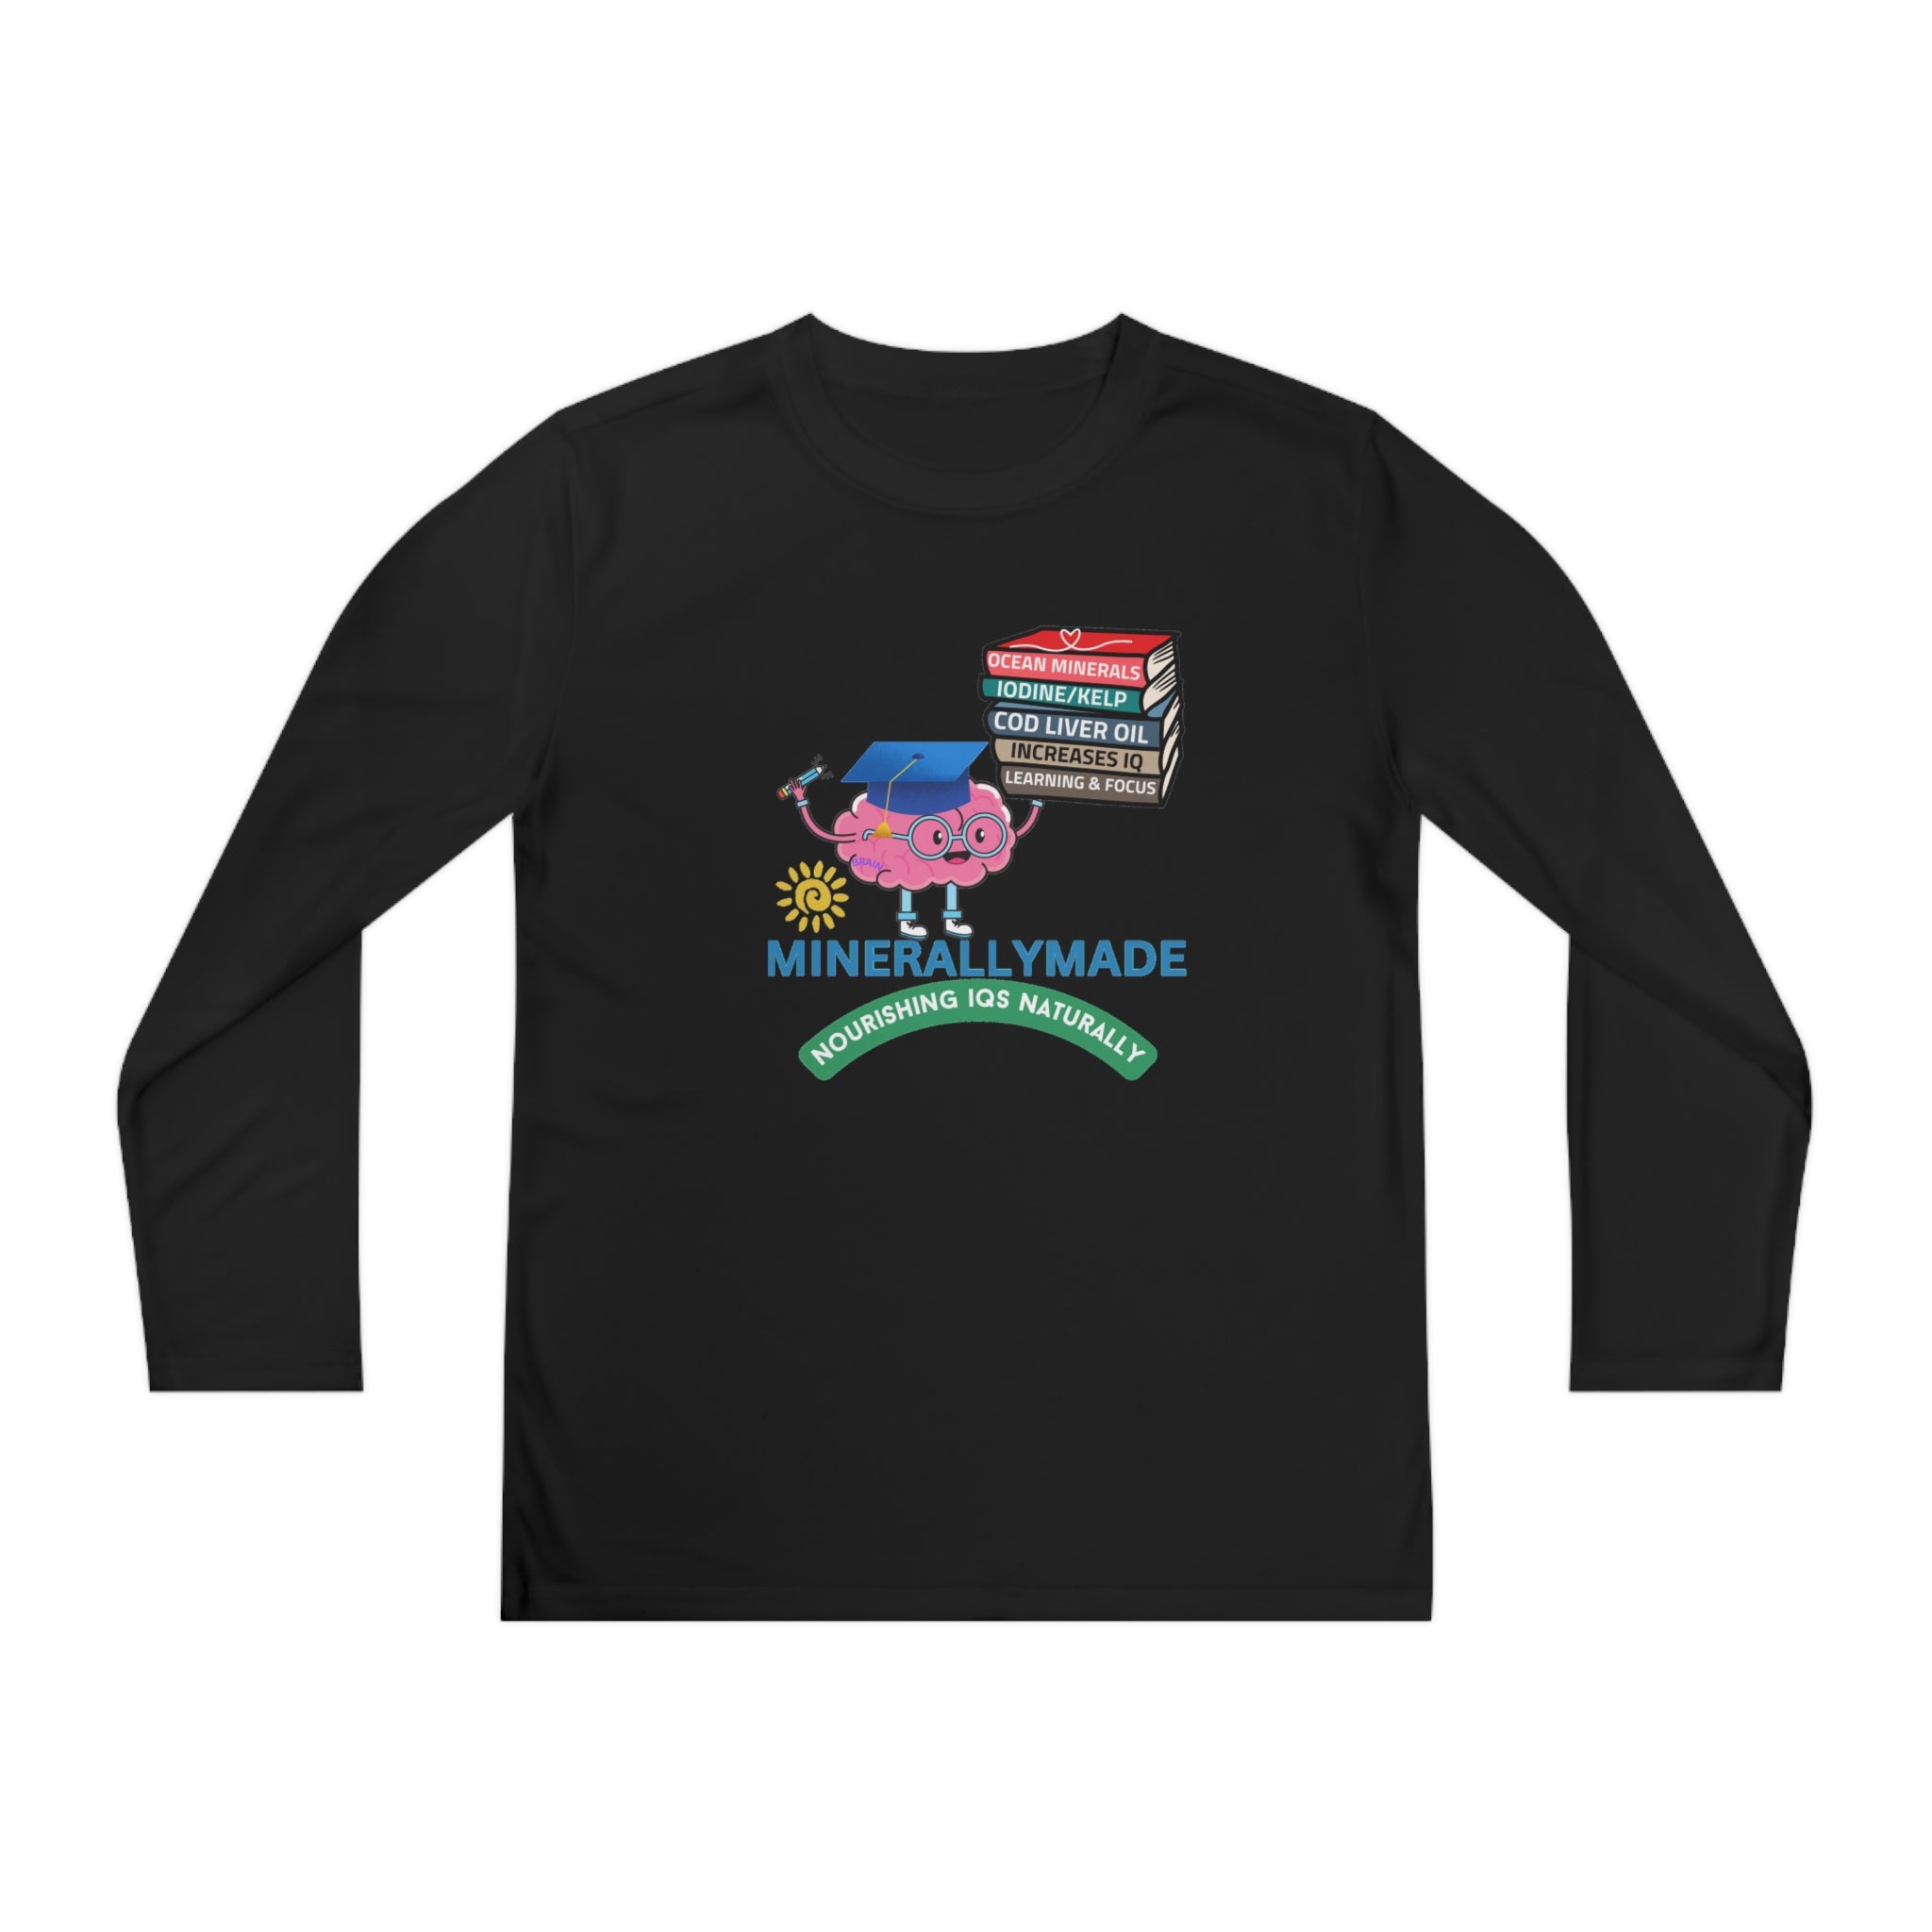 Minerallymade | Nourishing IQs Naturally | Youth Long Sleeve Competitor Tee